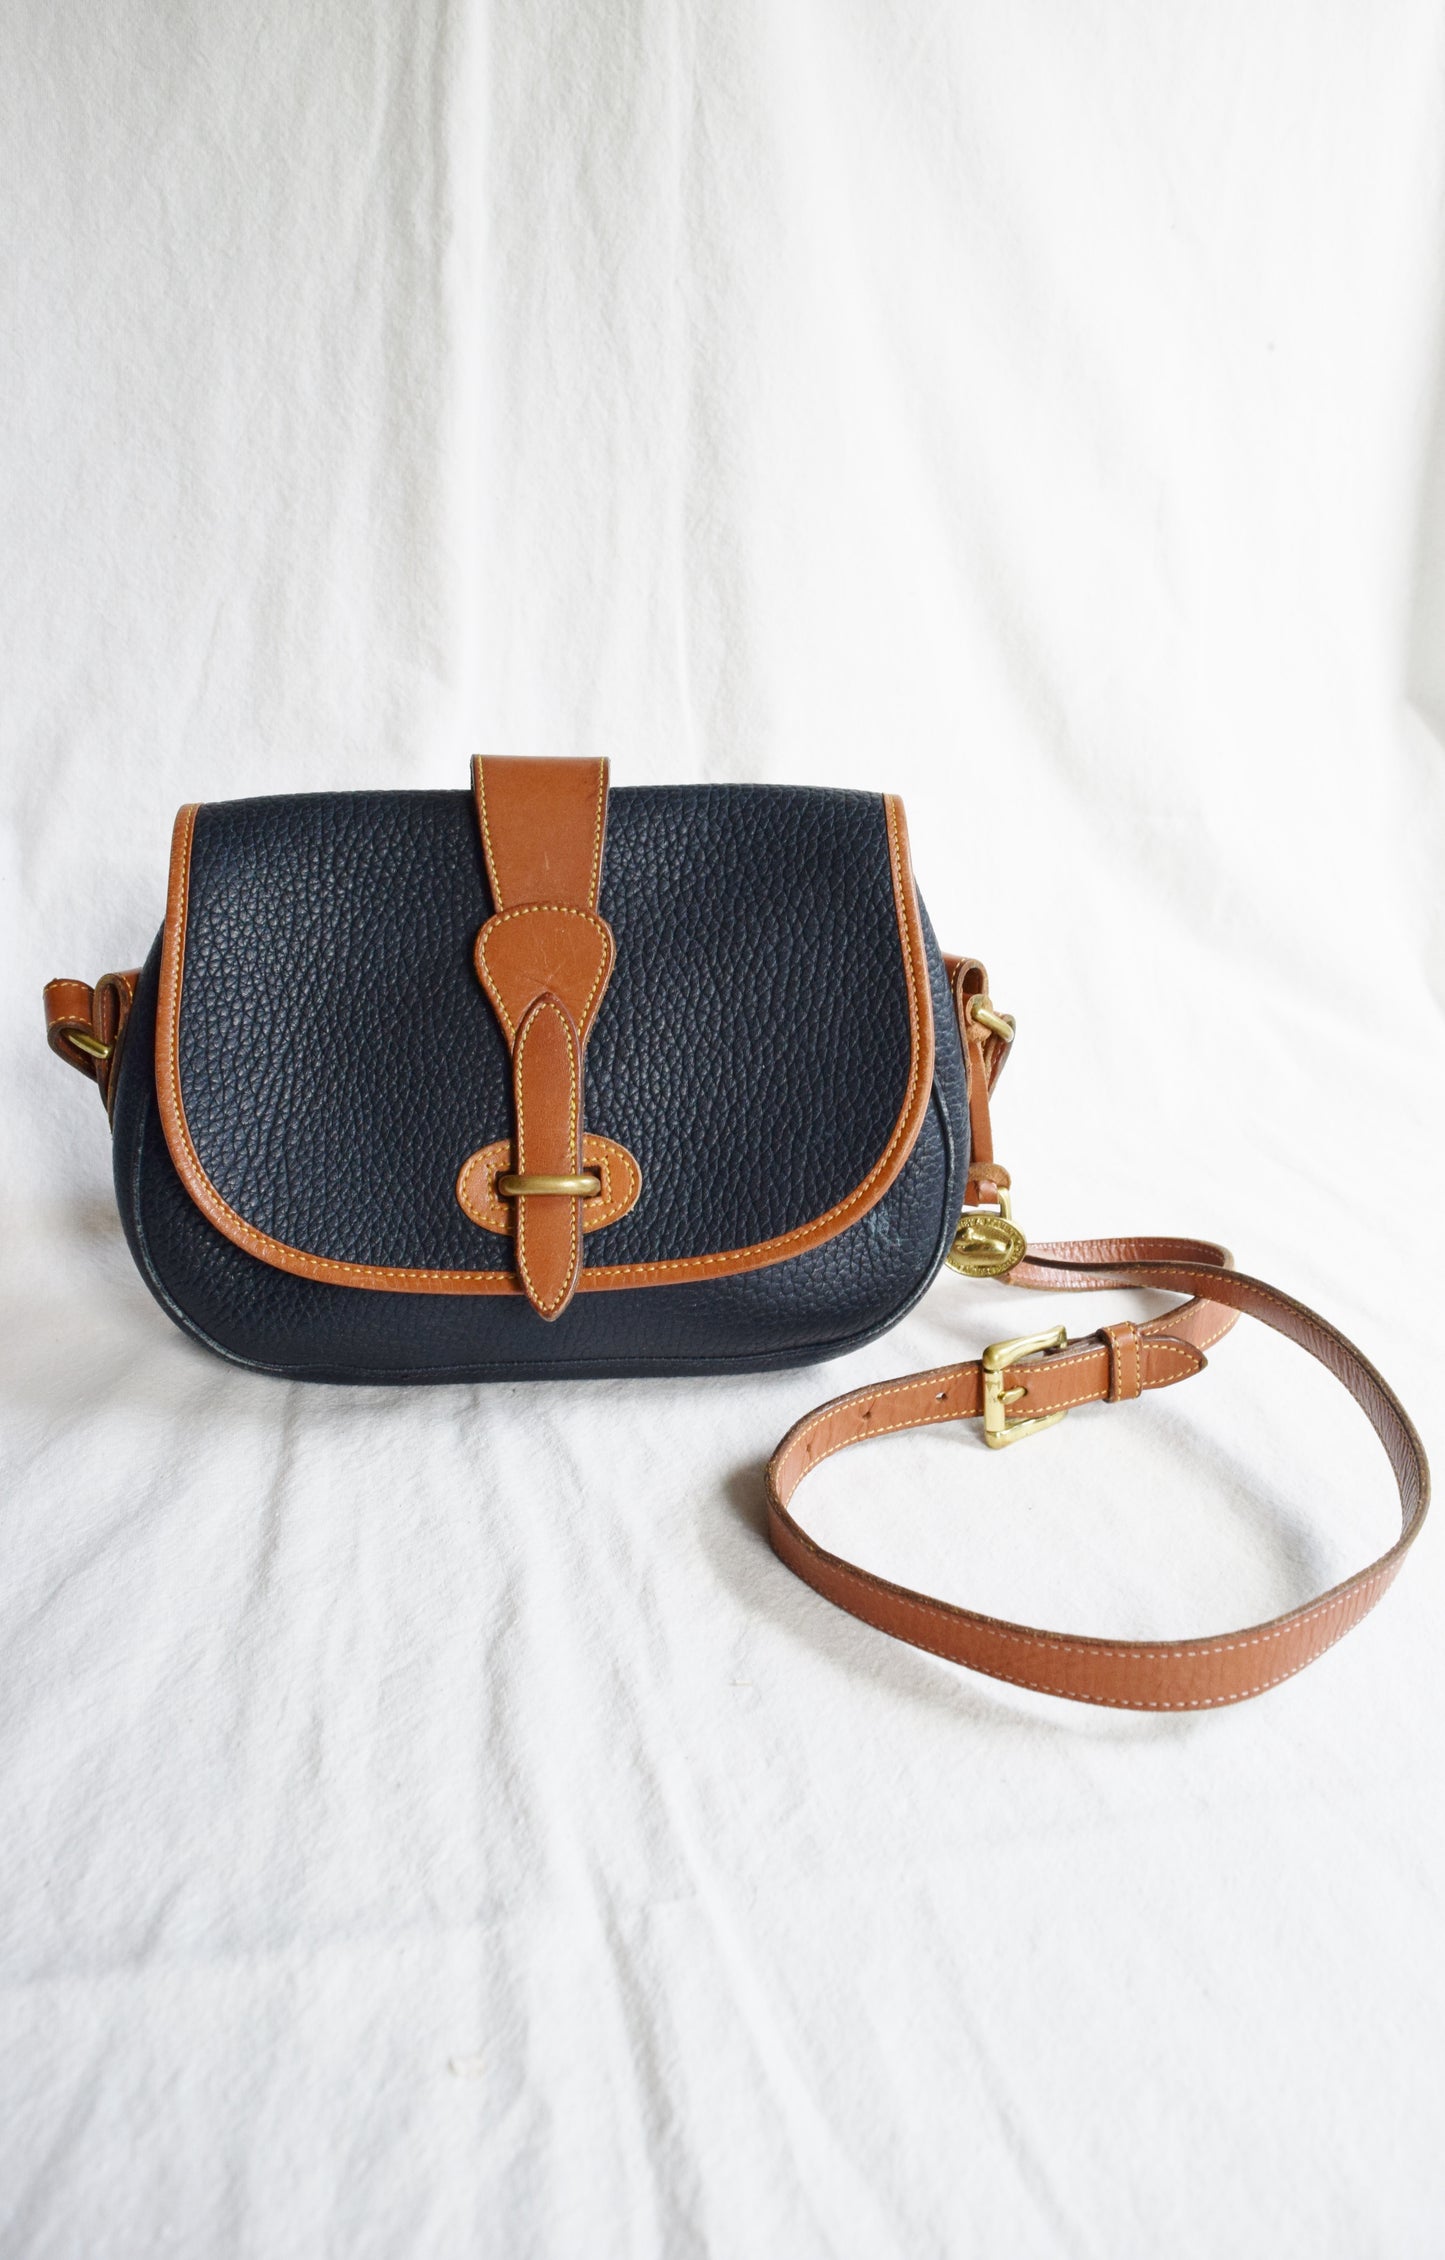 Vintage Dooney & Bourke Crossbody Saddle Bag in Navy and British Tan | All Weather Leather